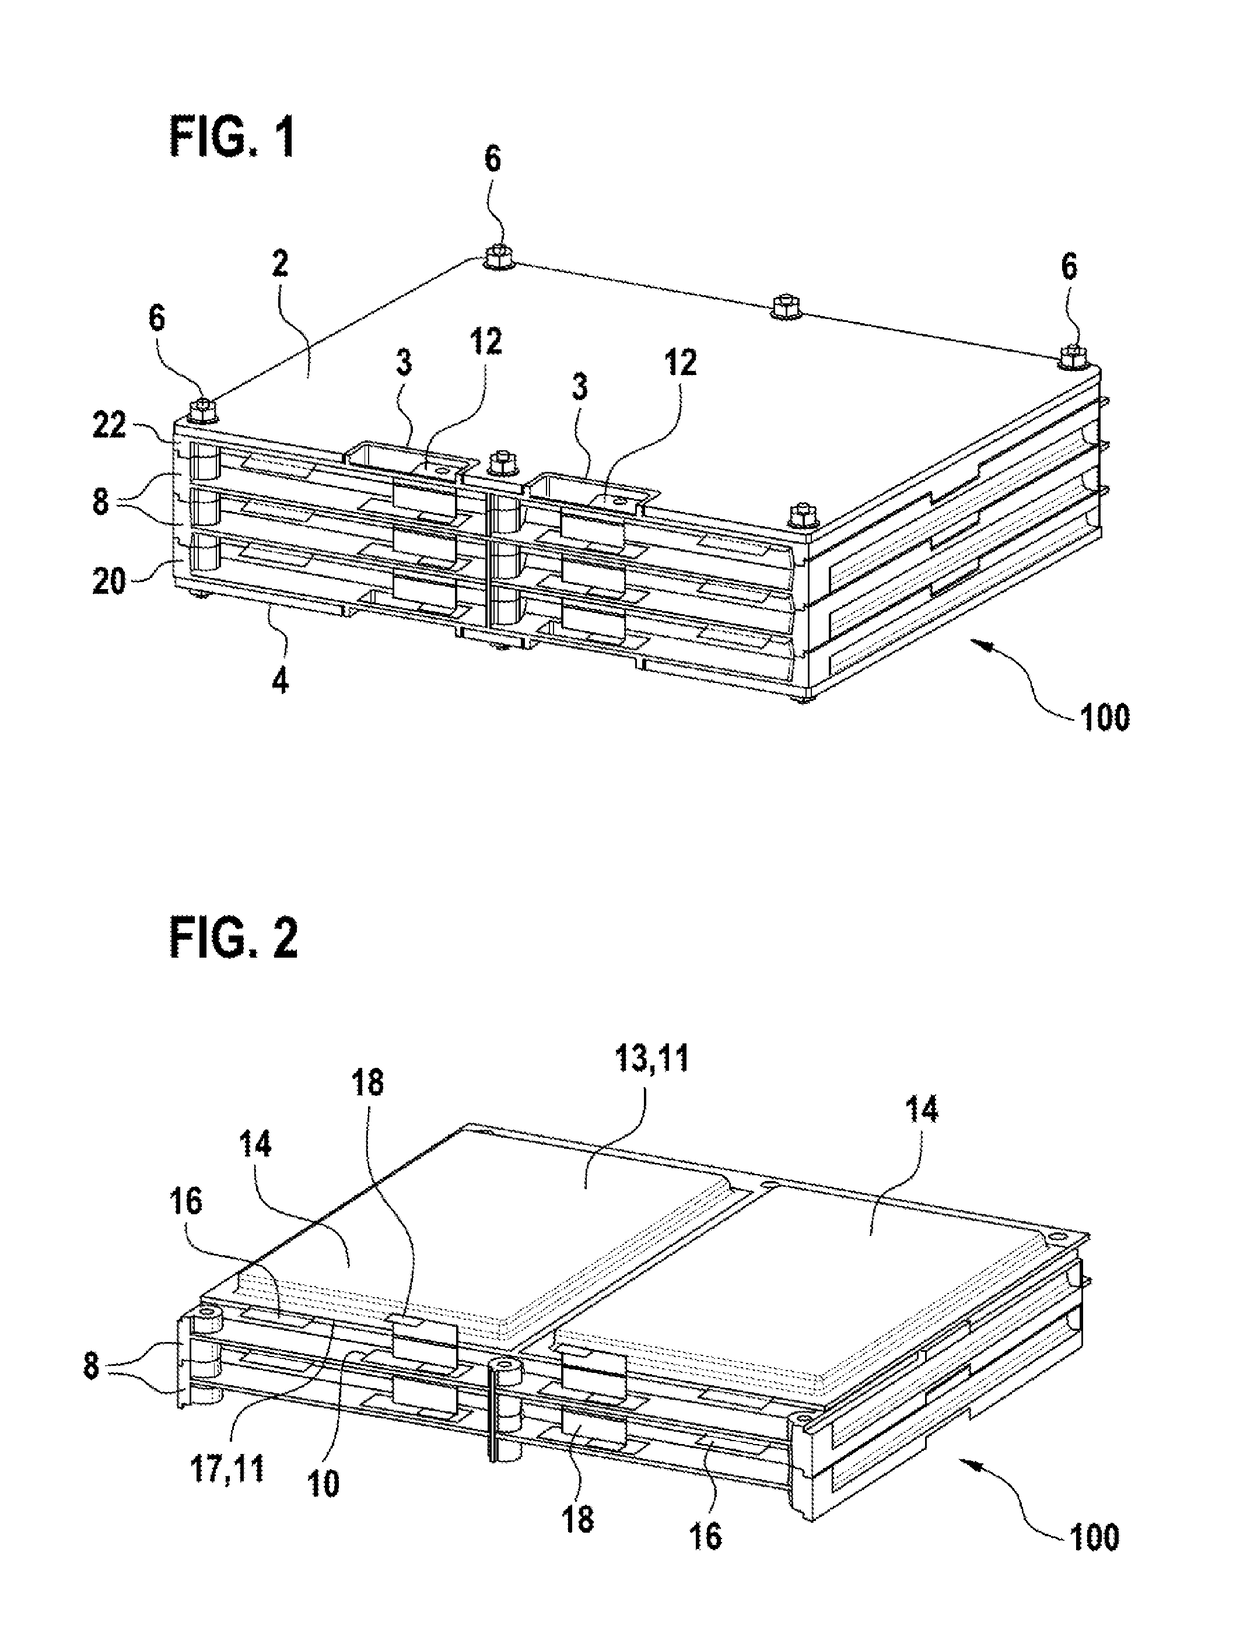 Cell frame for accommodating pouch cells